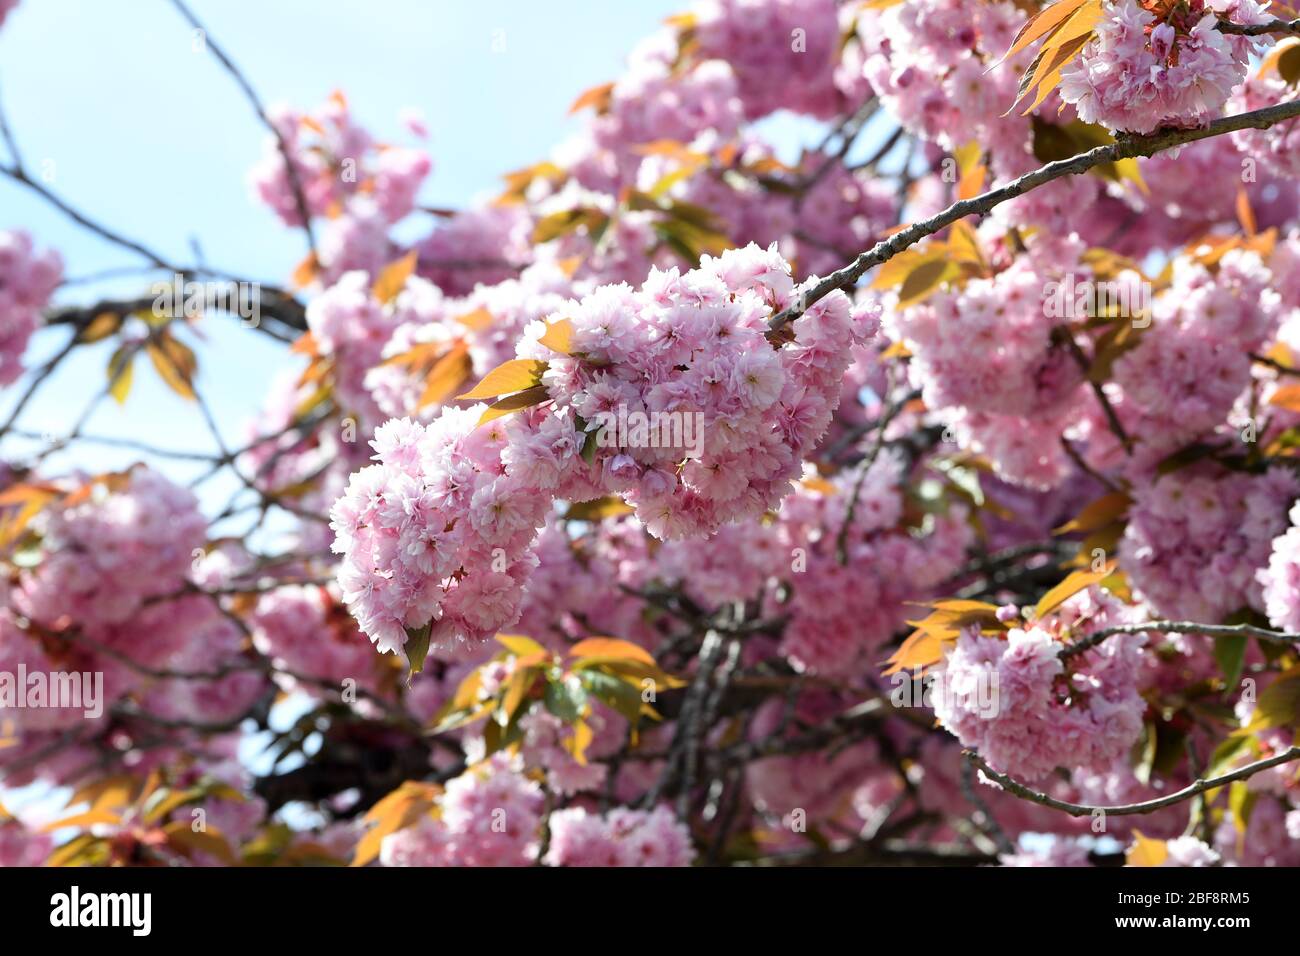 Pink Cherry blossom in bloom Stock Photo